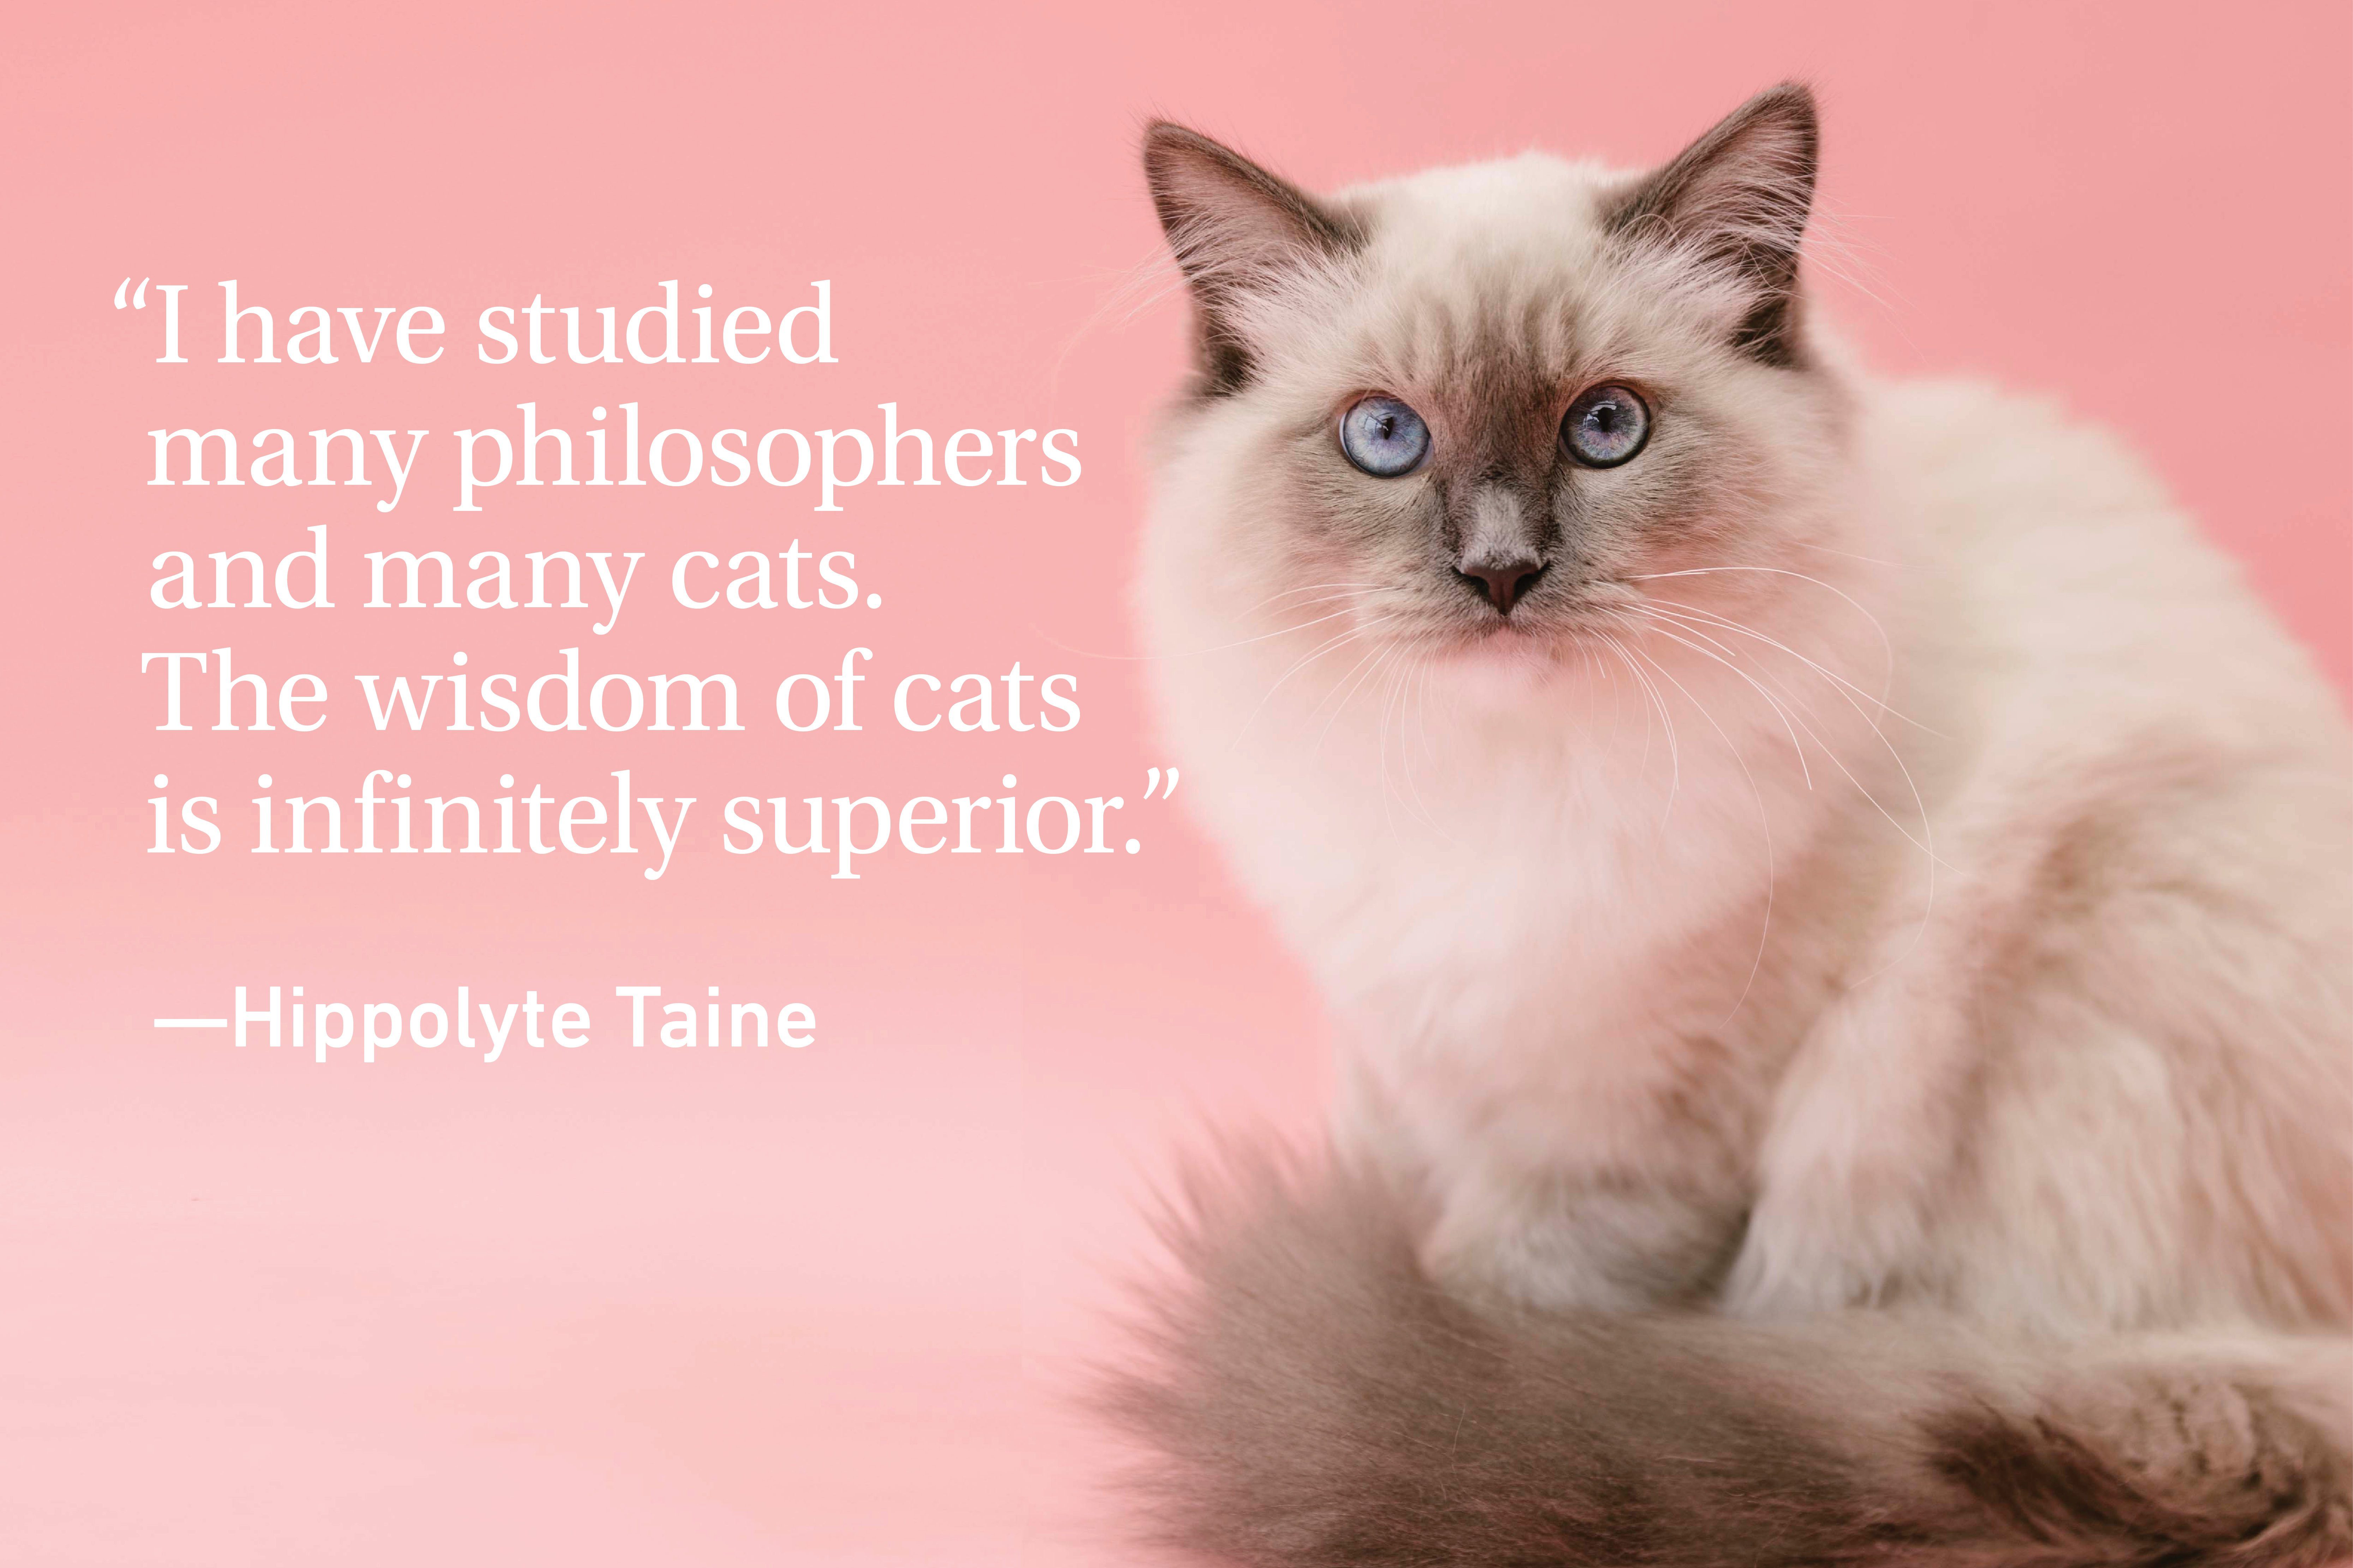 Cat Quotes Every Cat Owner Can Appreciate | Reader's Digest Canada